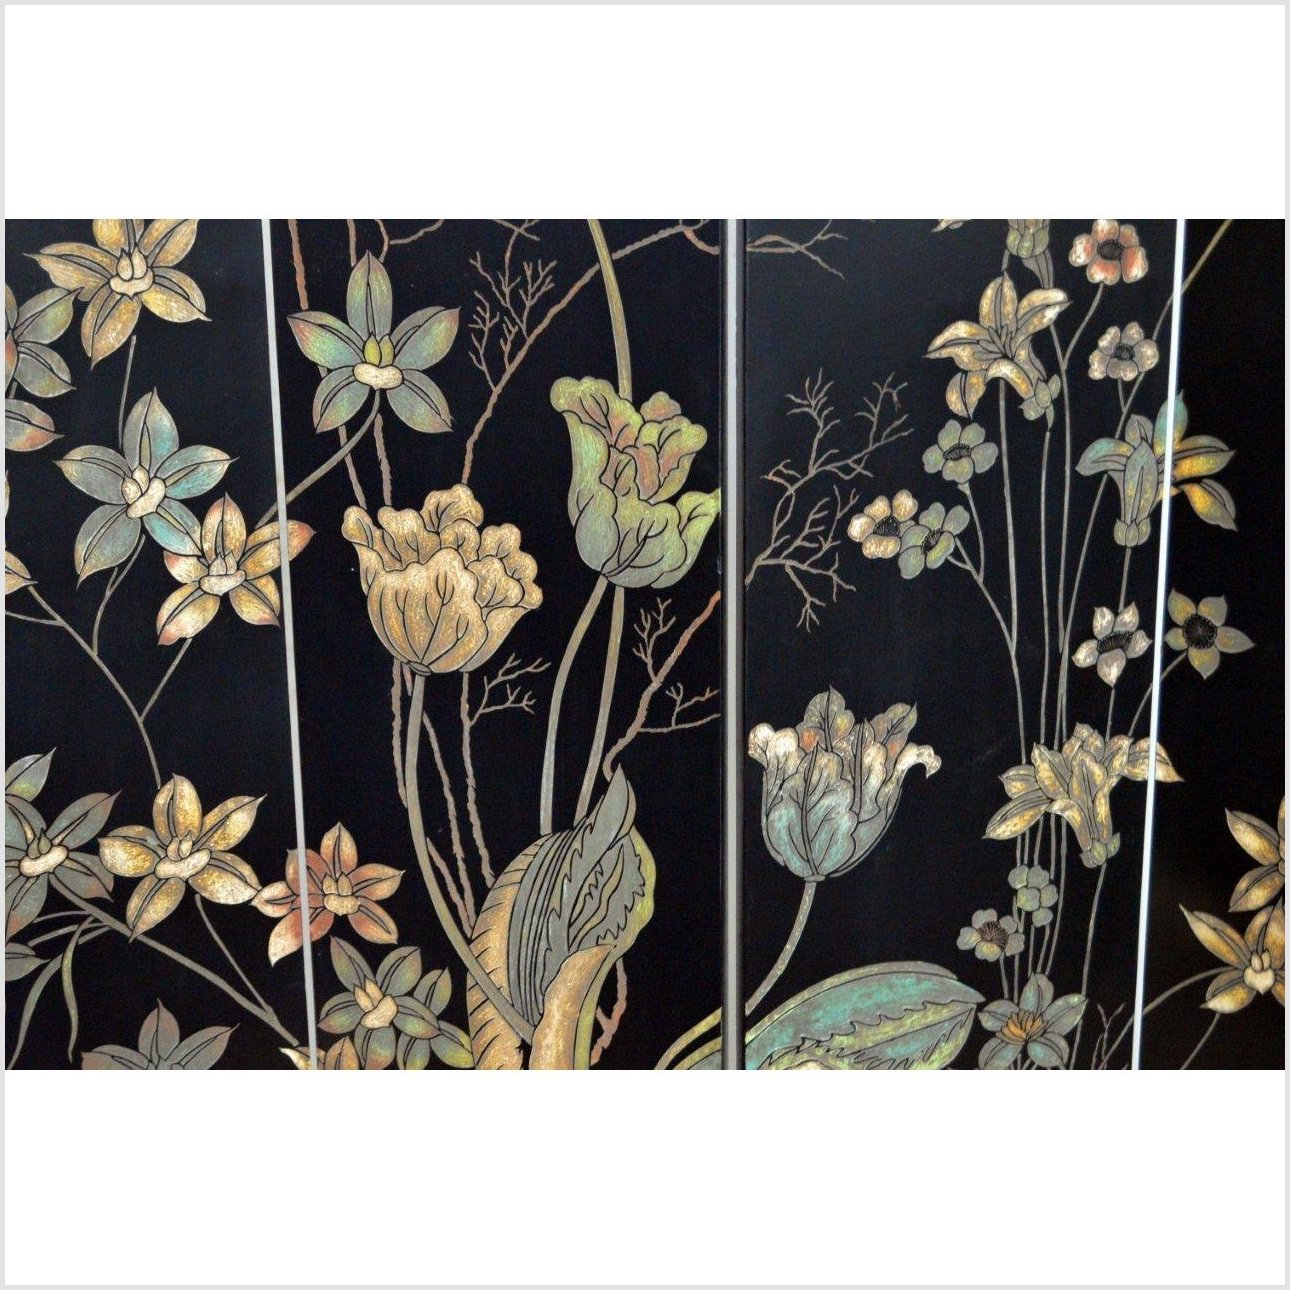 4-Panel Black Screen with Chinoiseries of Flowers-YN2892-5. Asian & Chinese Furniture, Art, Antiques, Vintage Home Décor for sale at FEA Home